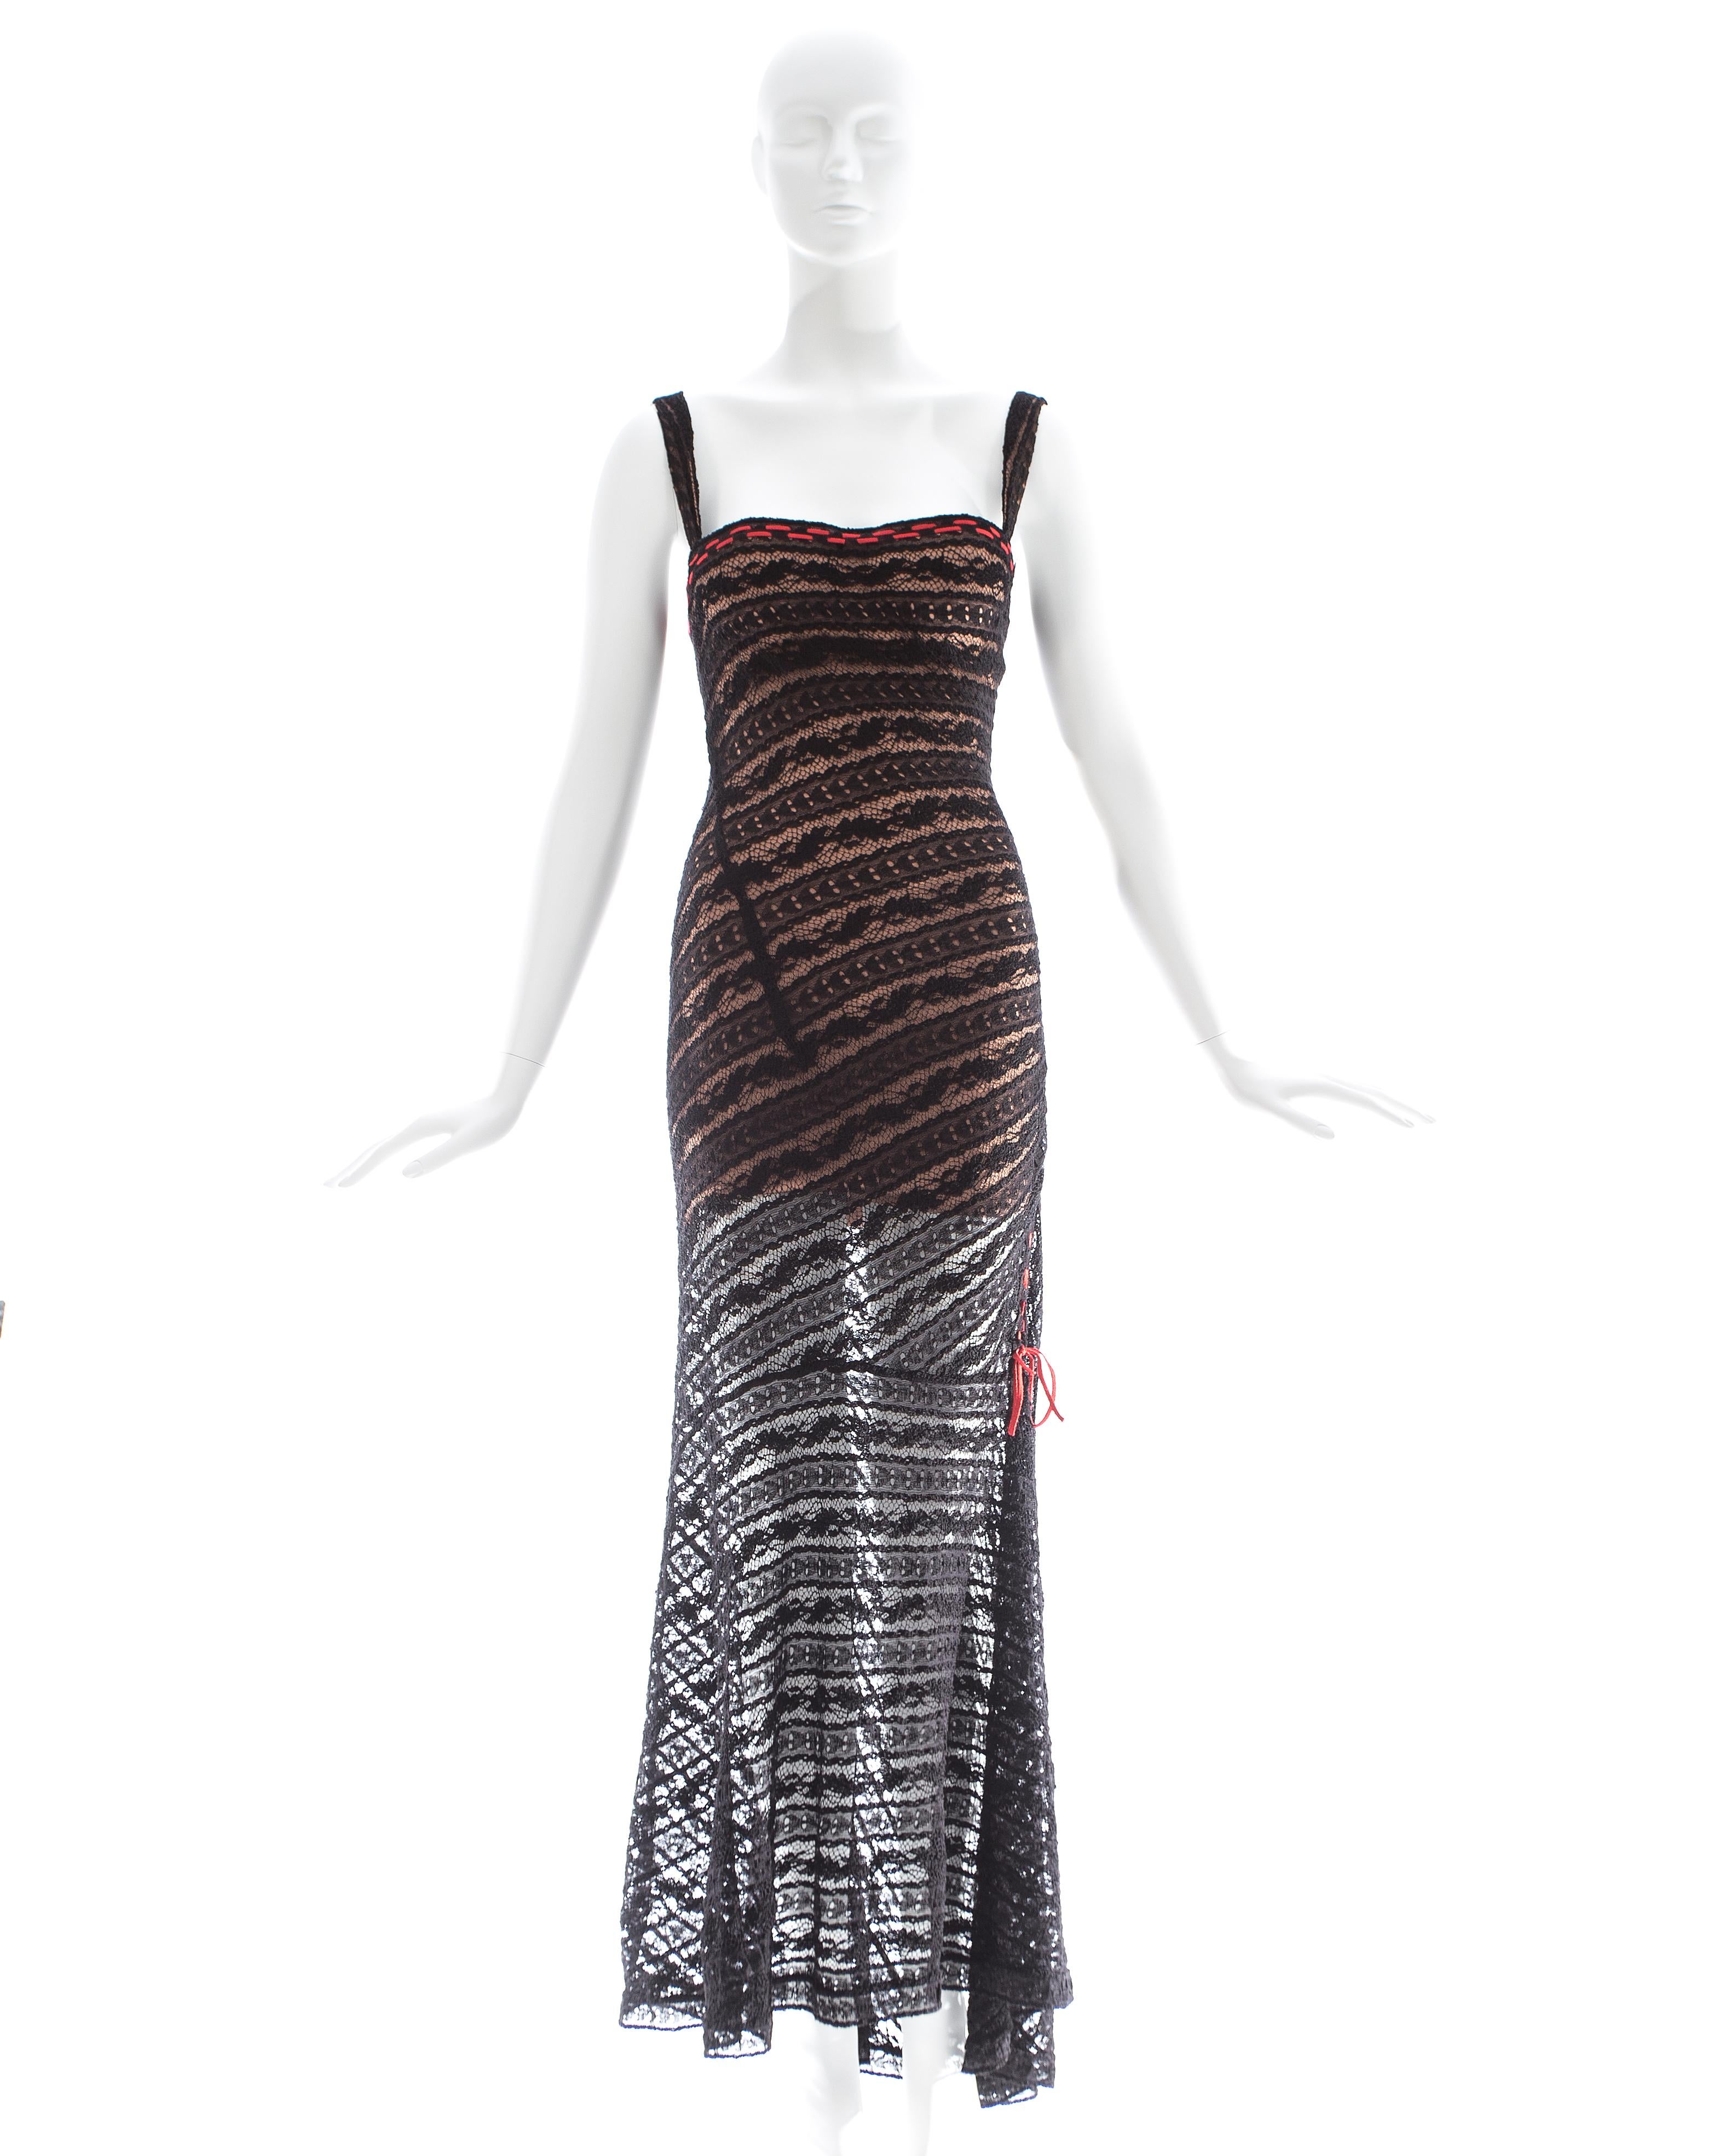 Azzedine Alaia; Black lace knit evening dress with built in padded bra and spandex nude mini dress. 

Fall-Winter 1993